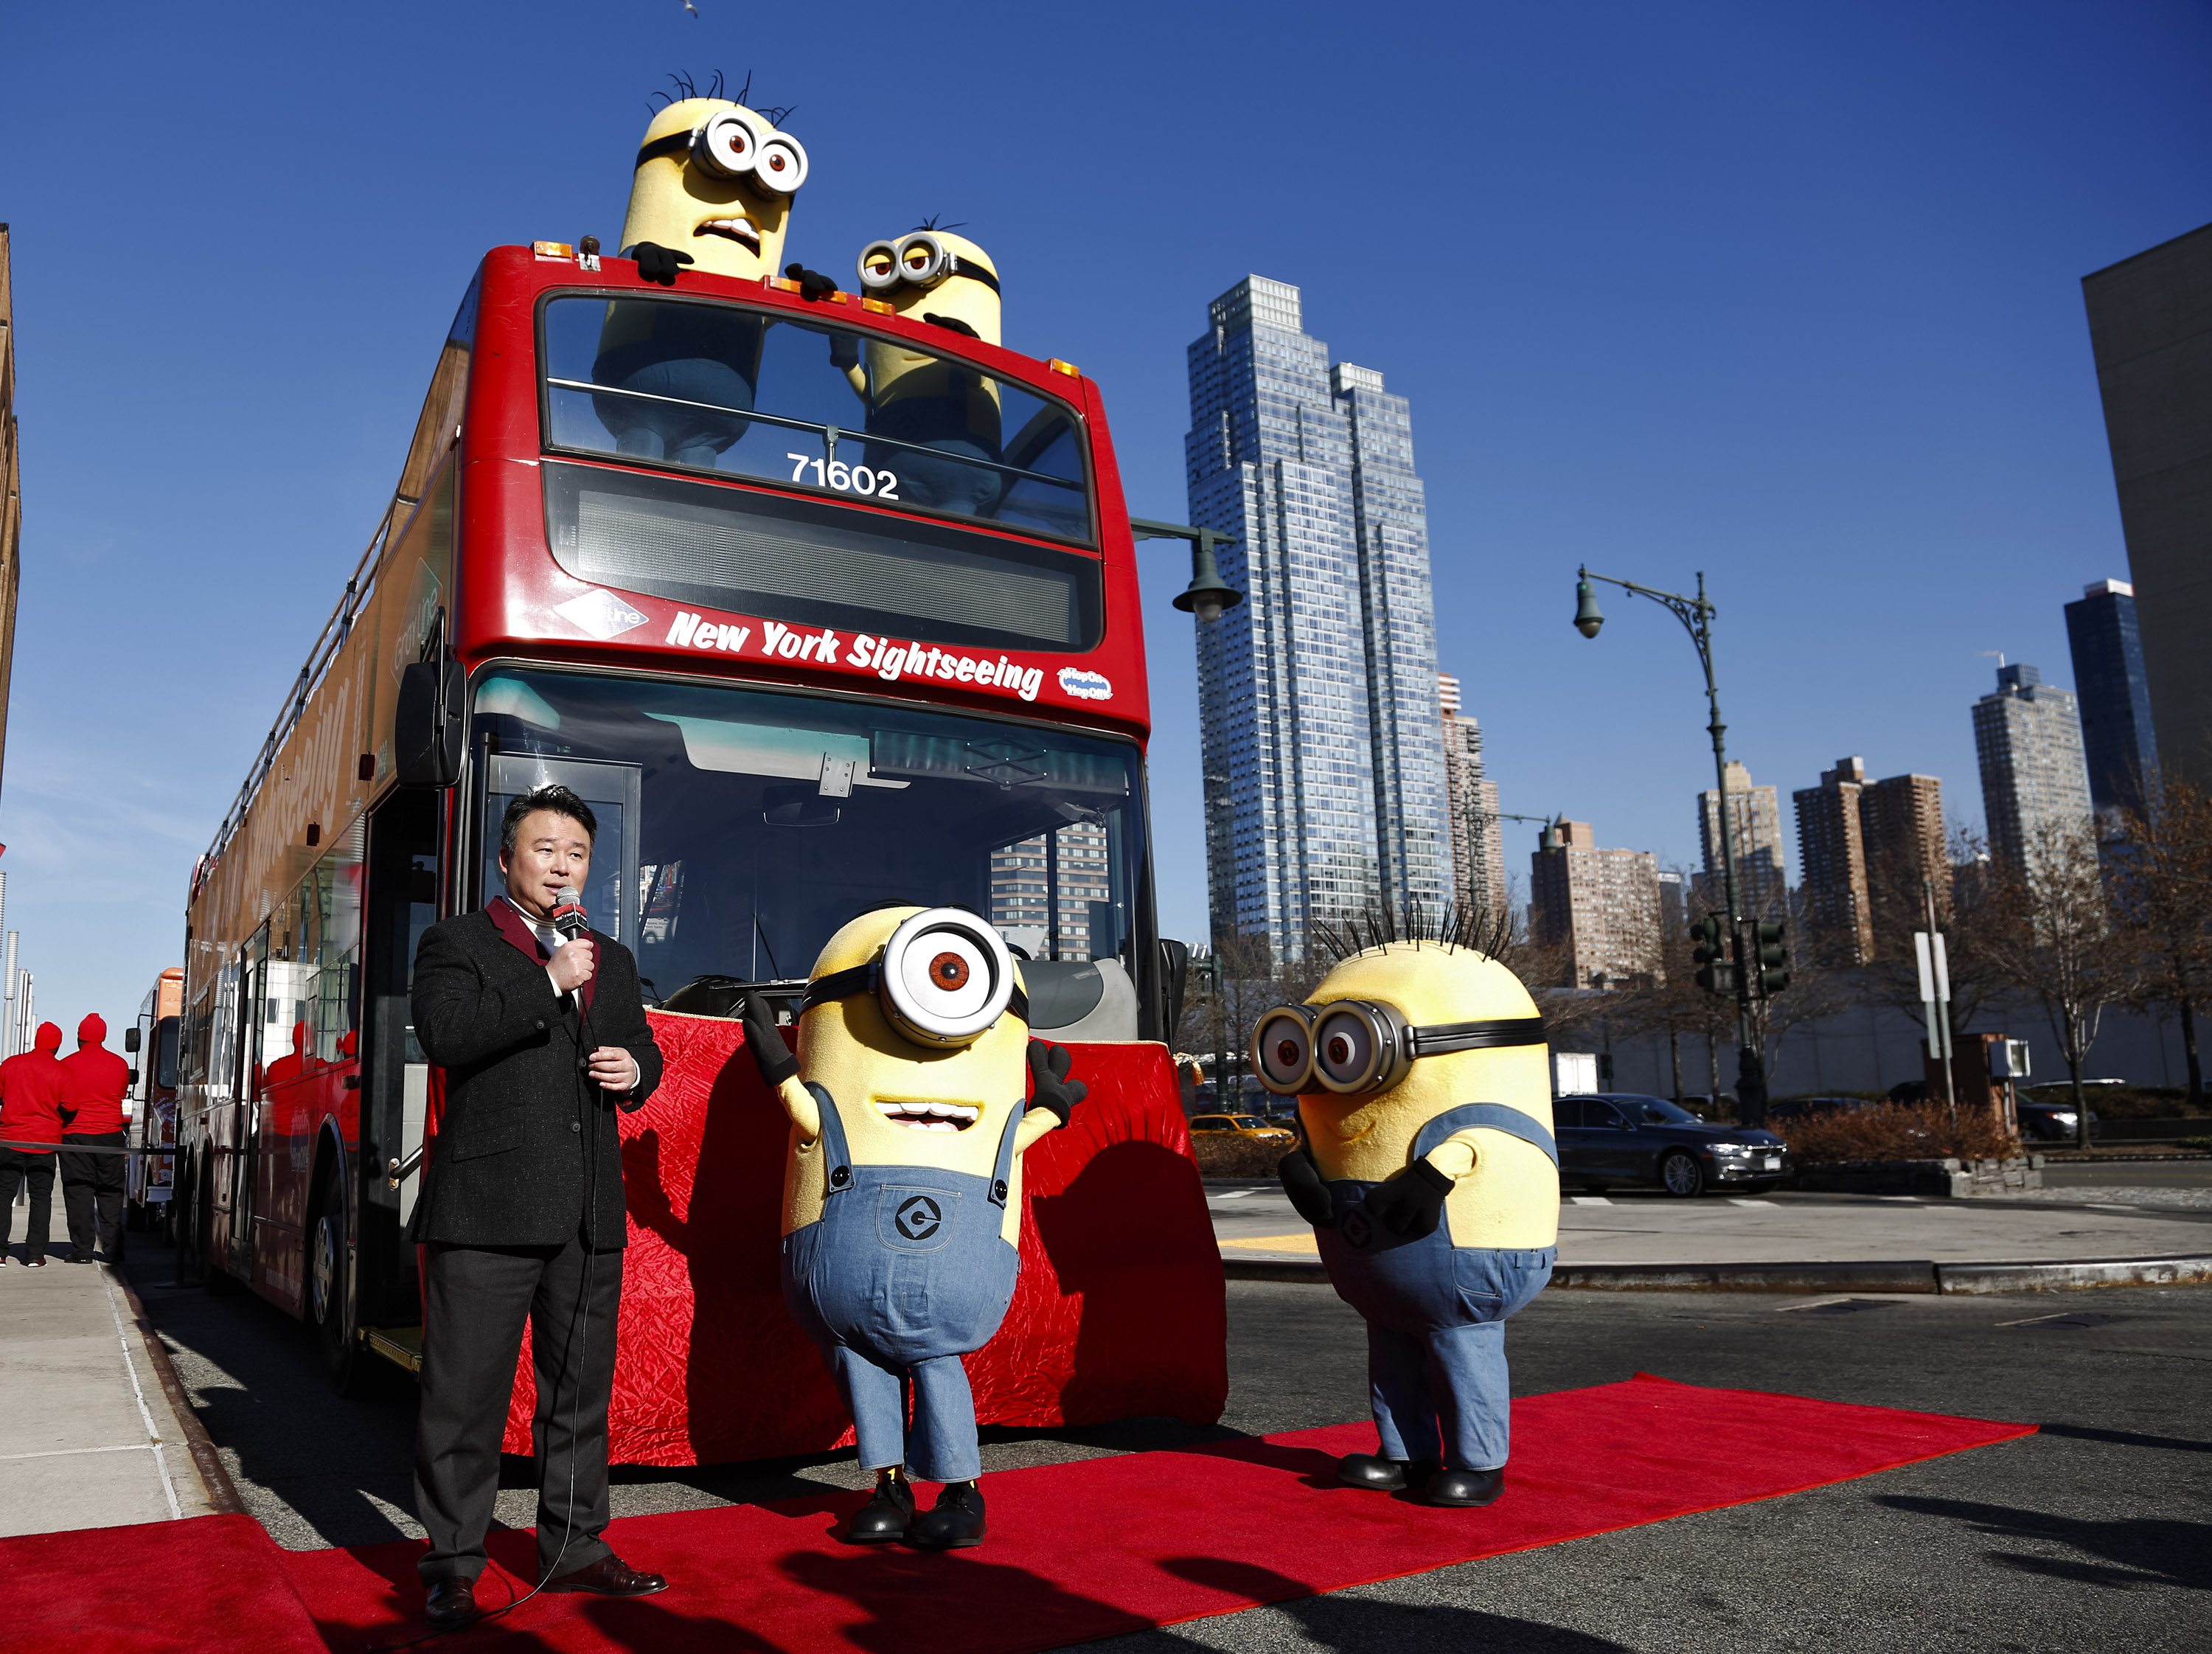 David W. Chien interacts with The Minions at Ride of Fame (November 25th, 2013).